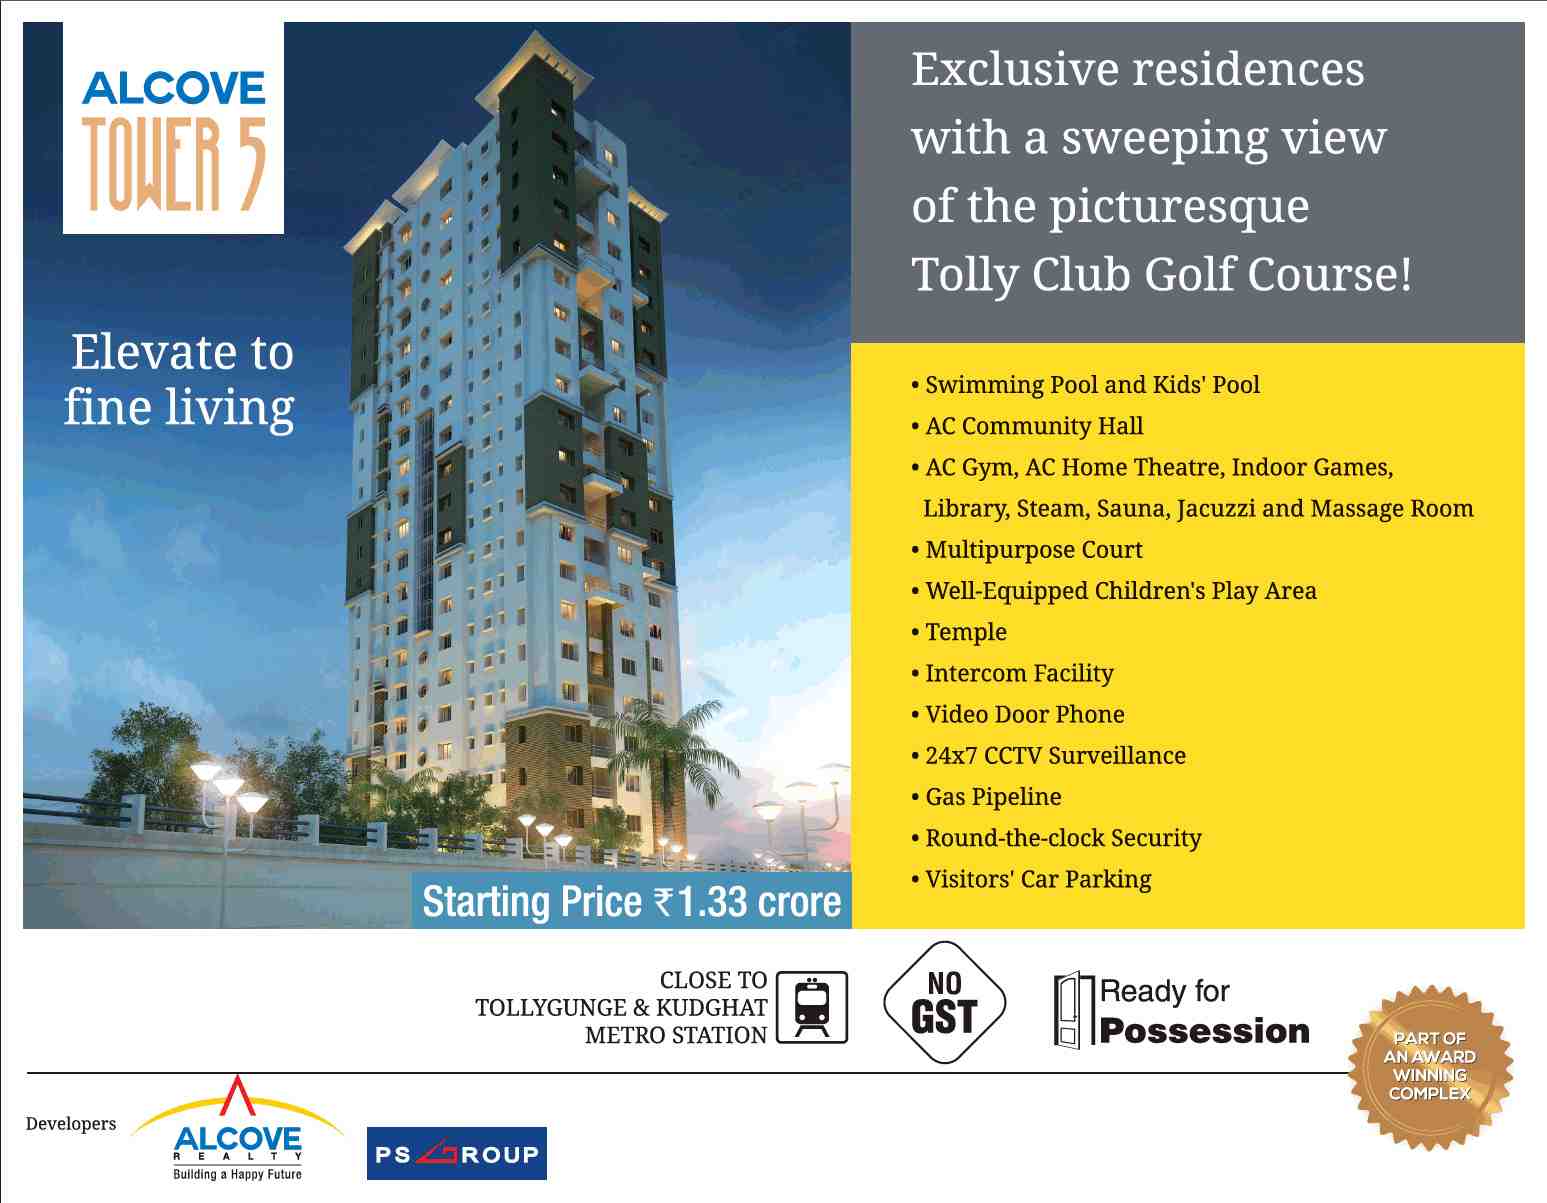 PS Alcove Tower 5 is ready for possession in Kolkata Update